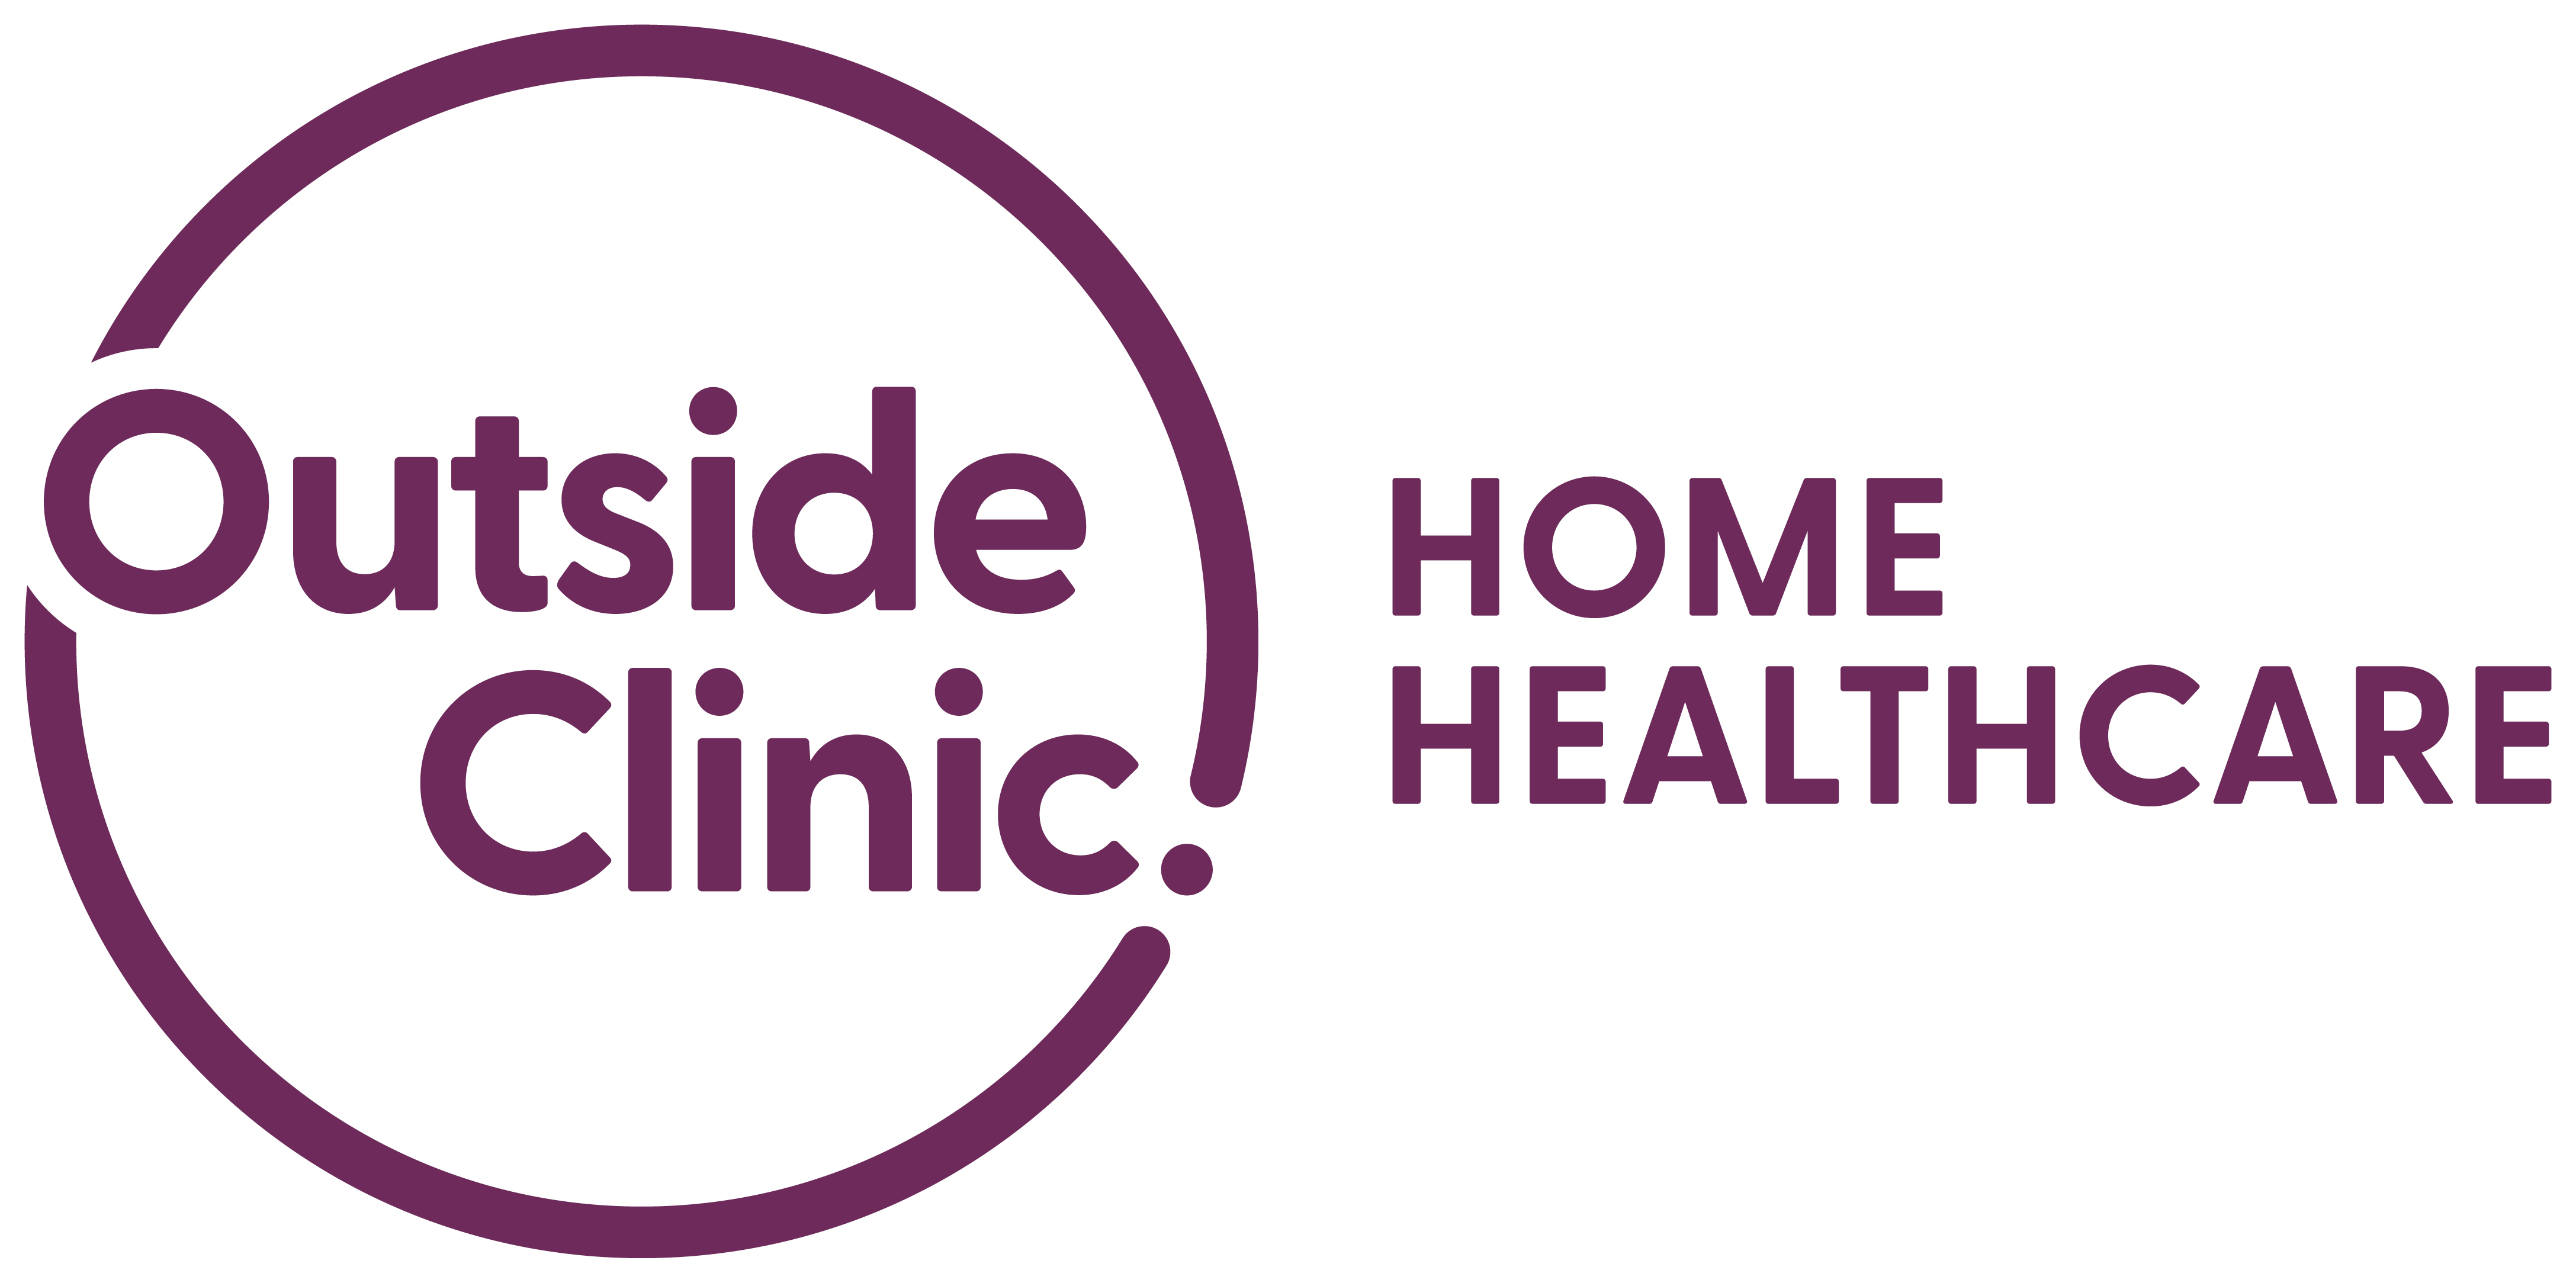 OutsideClinic Home Healthcare